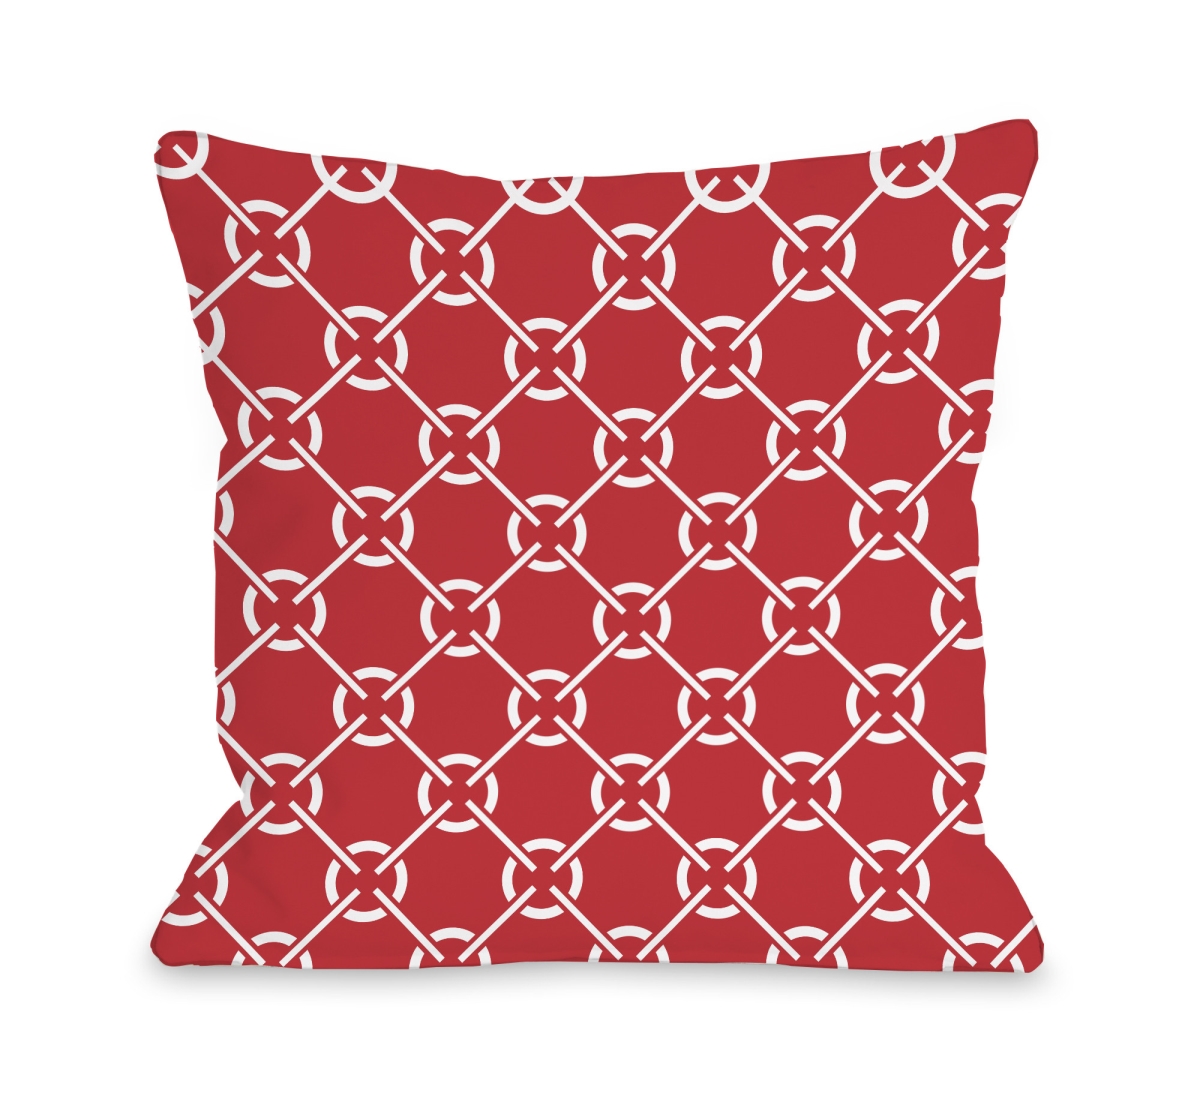 16 X 16 In. Ceciles Circles Pillow, Poppy Red